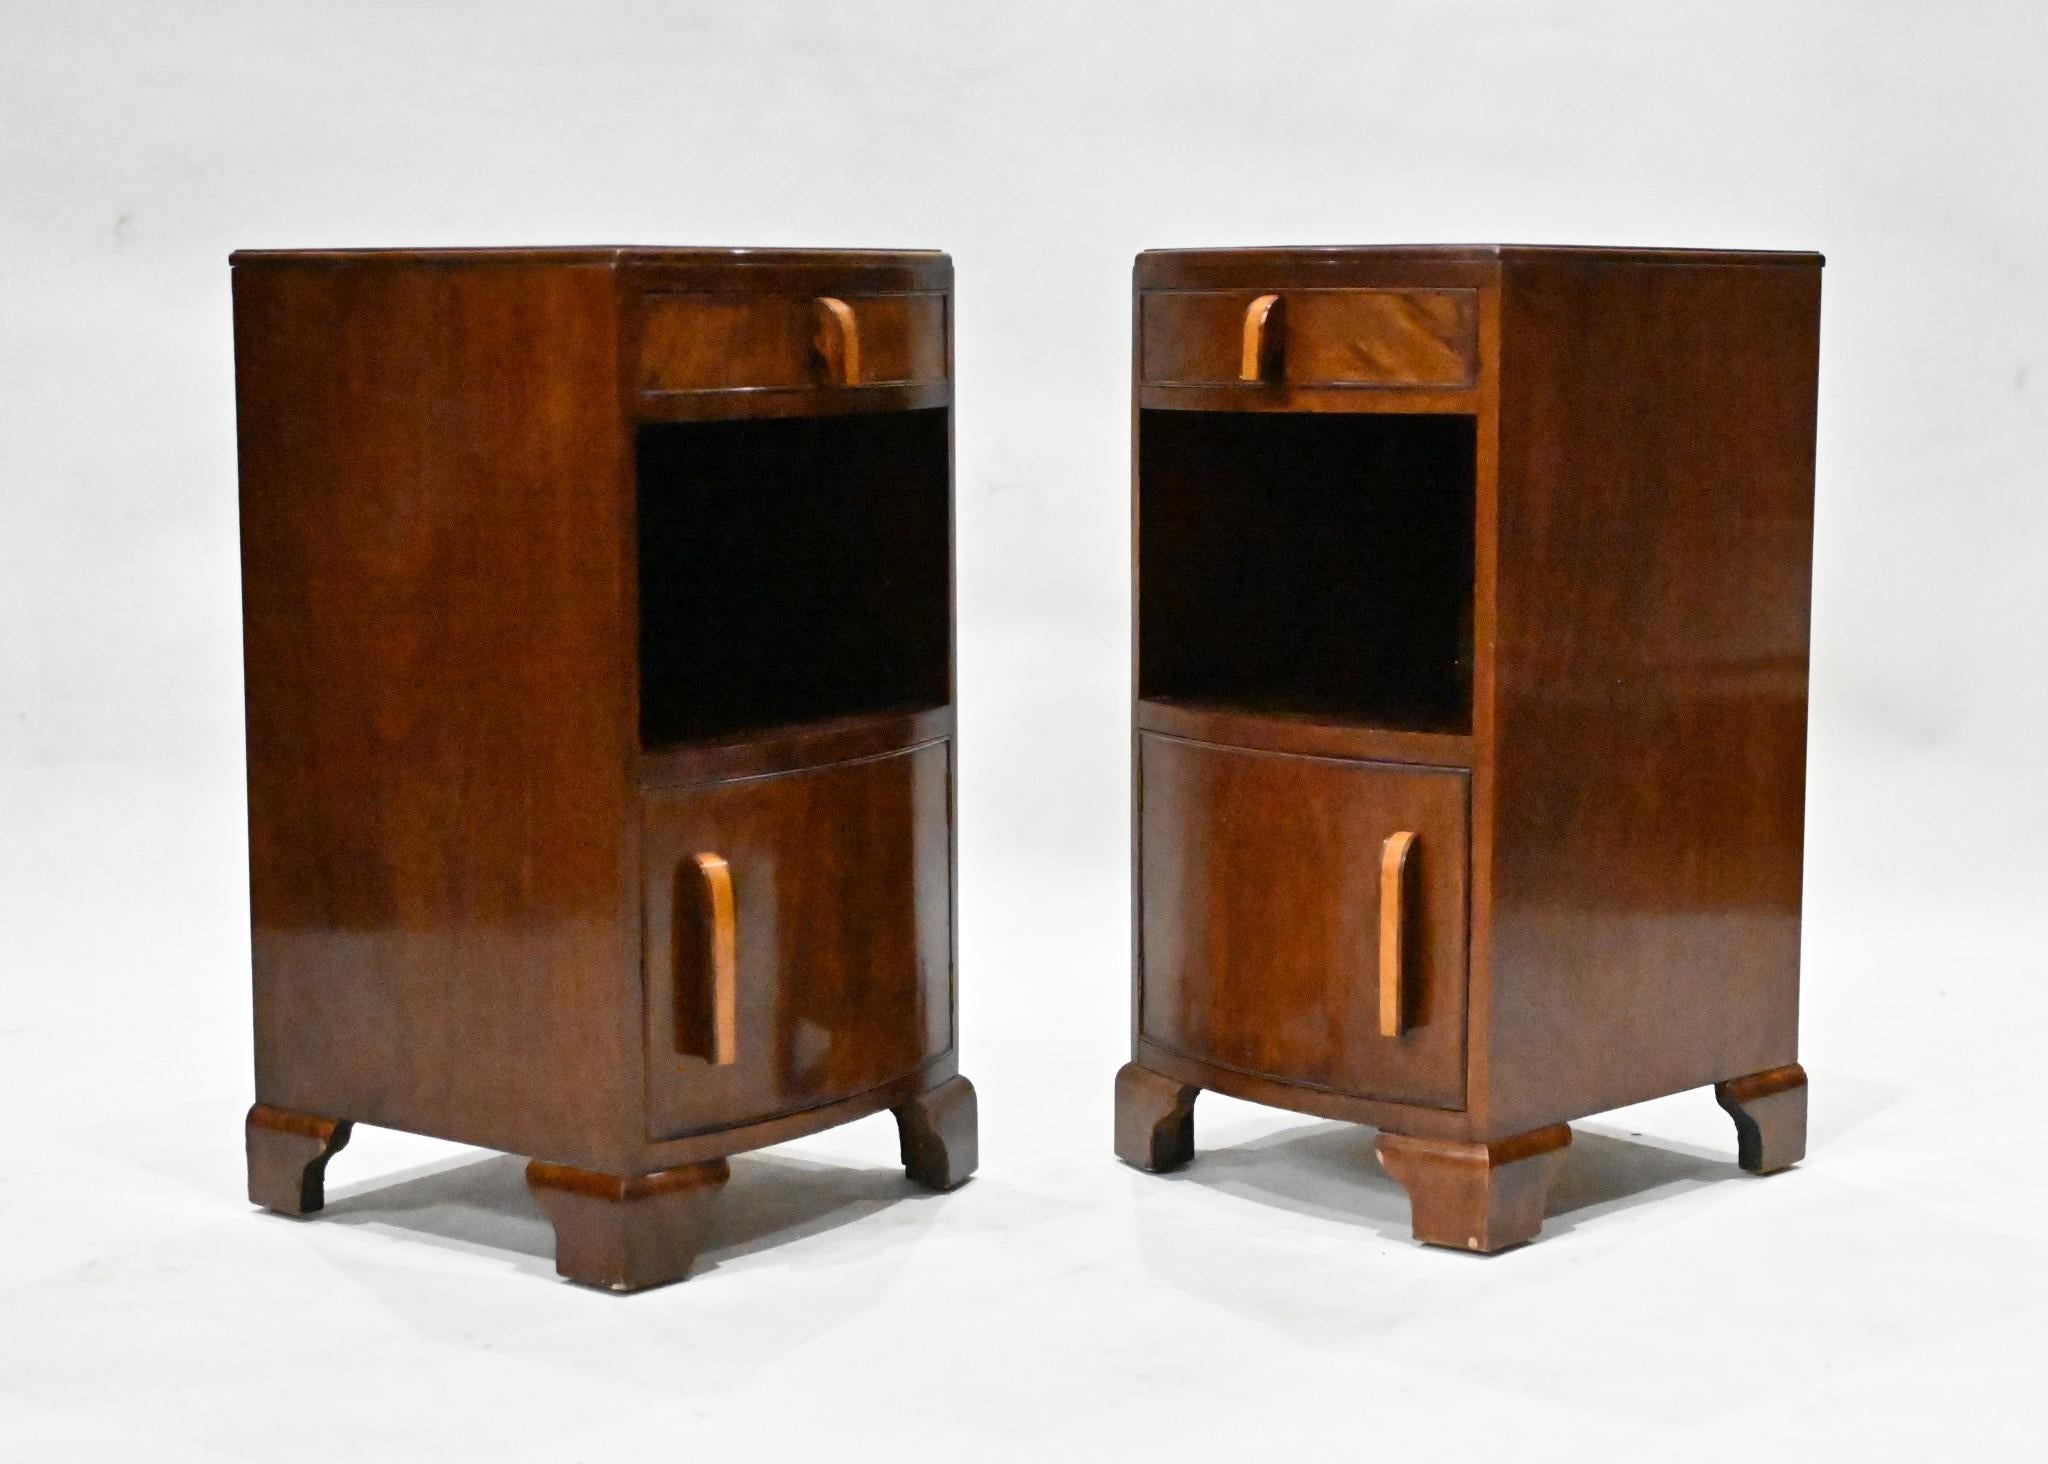 Pair Period Art Deco Bedside Cabinets Nightstands 1920s For Sale 2